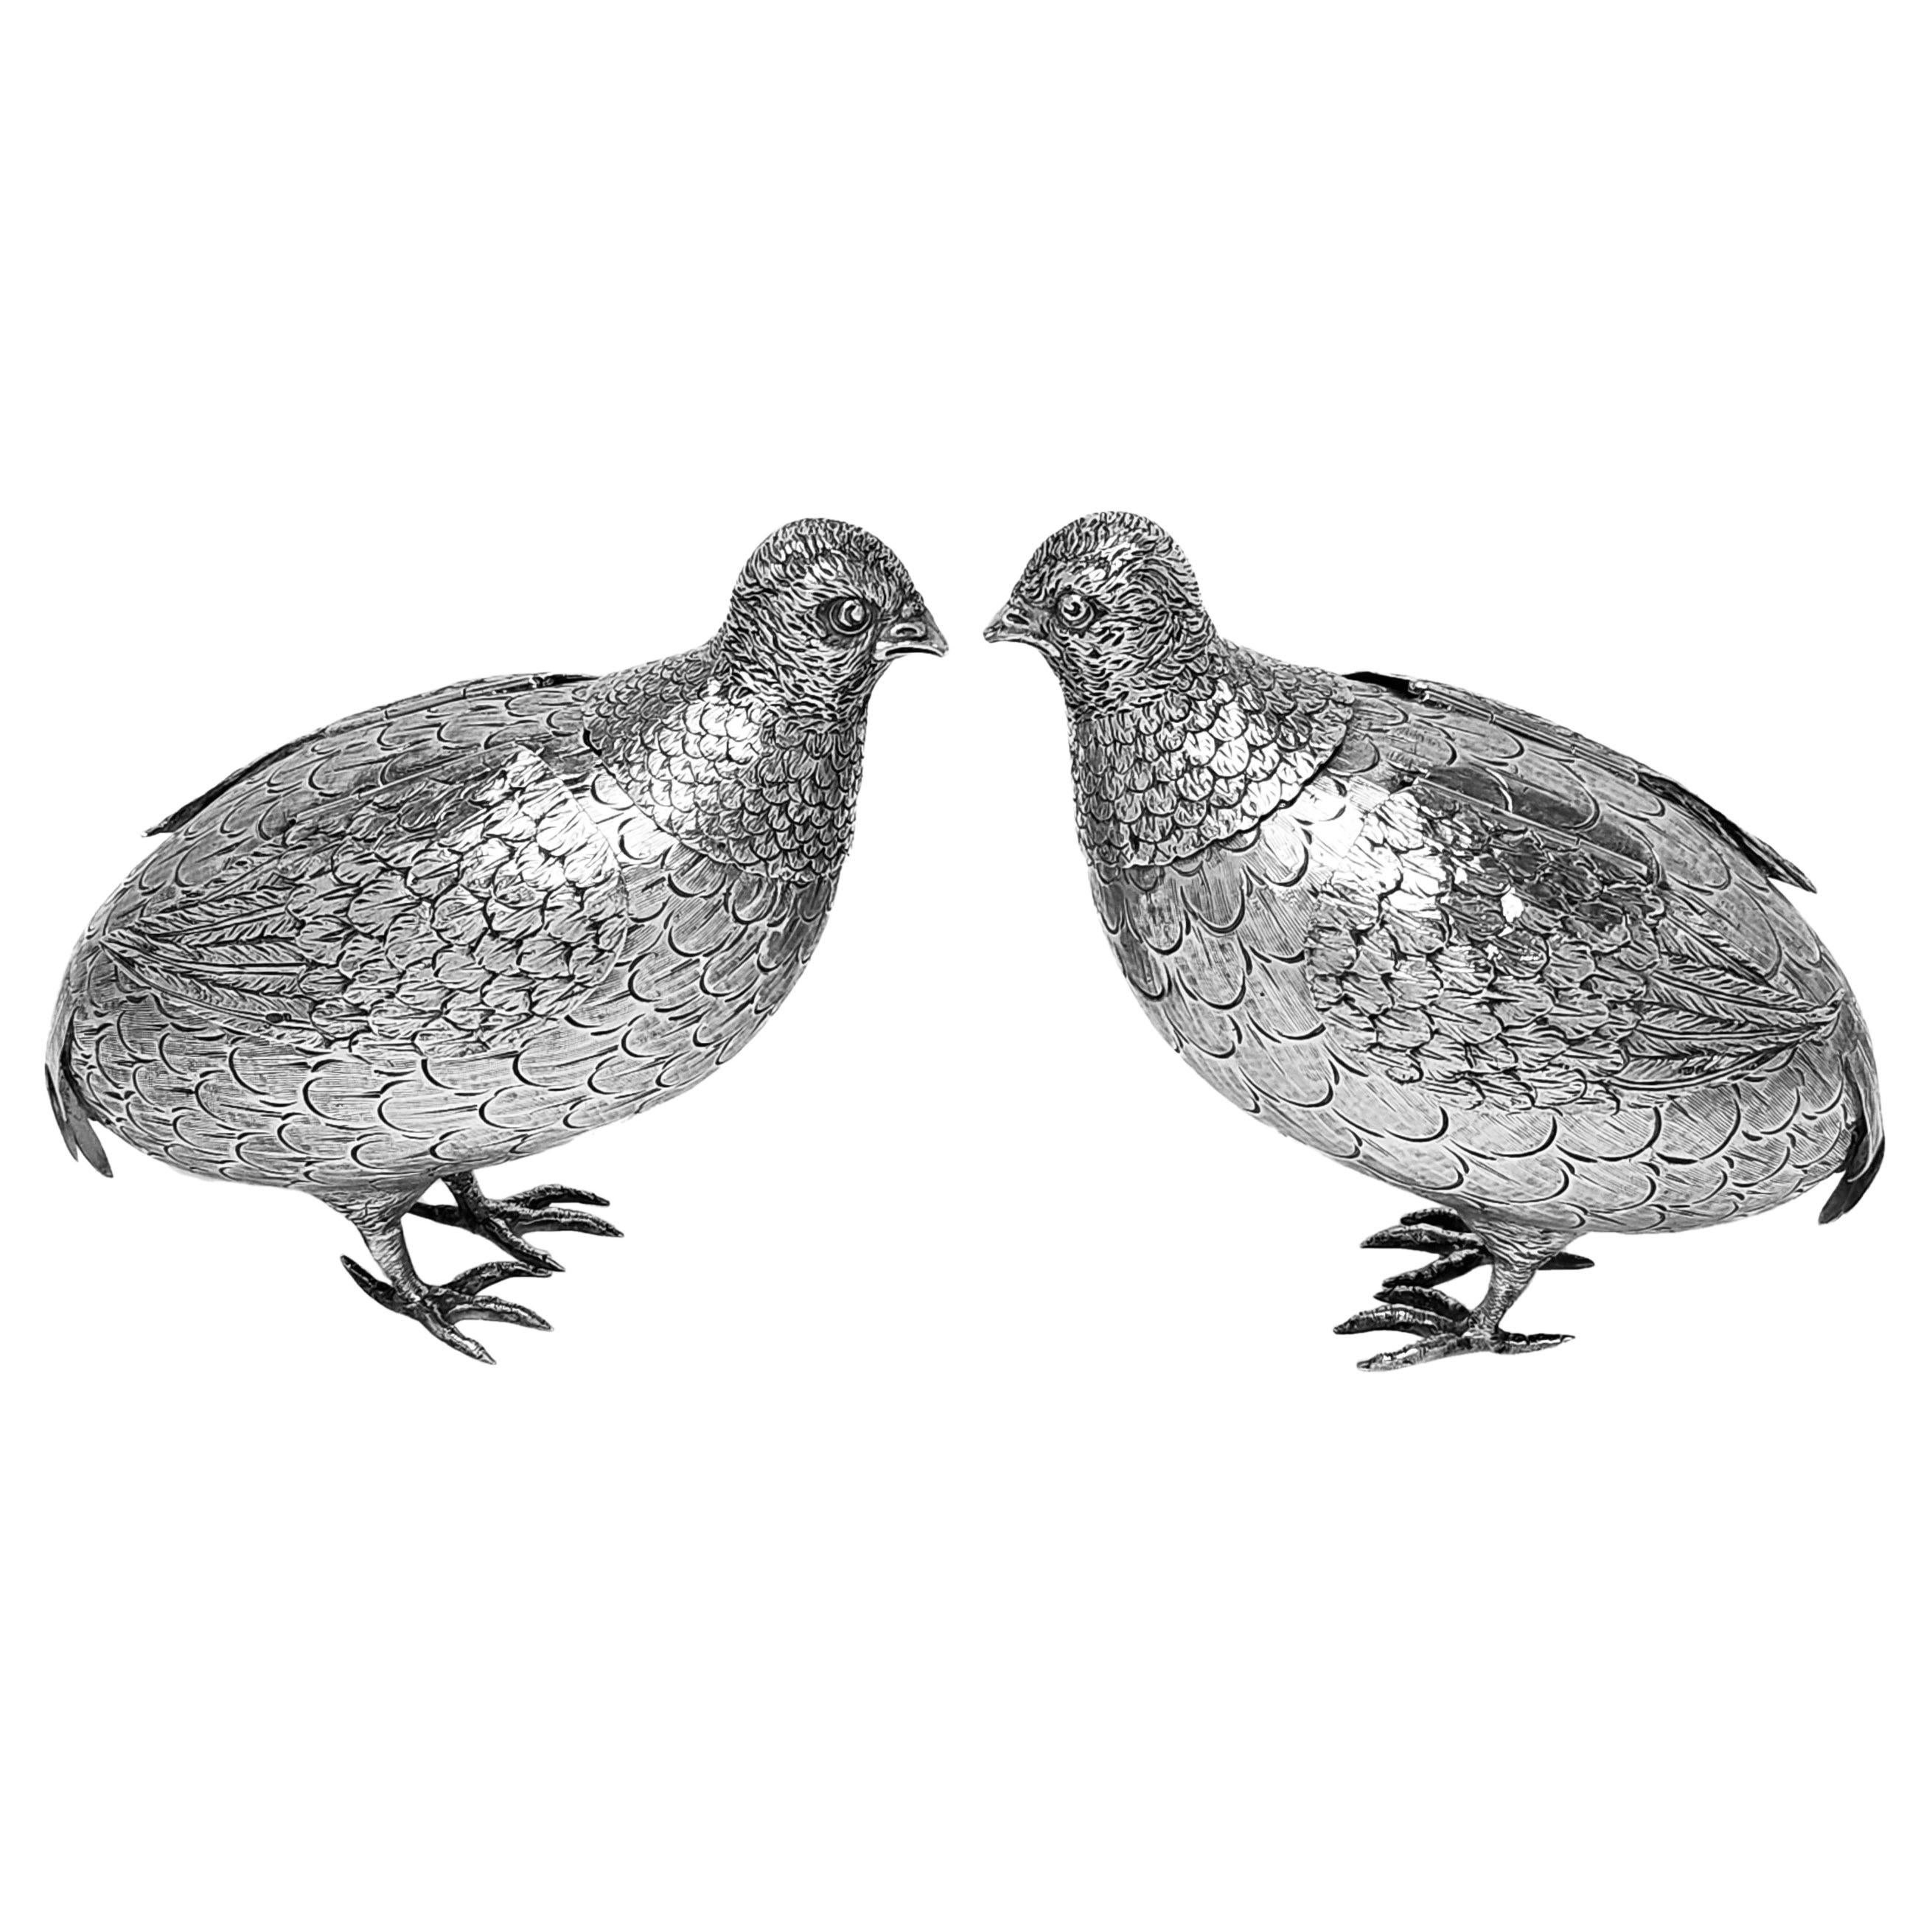 A pair of lovely Antique Silver Model Grouse created with a good attention to detail. These Sterling Silver Birds have hinged silver sings and are of a good size. 

Made in Germany in c. 1909 by Berthold Muller. Chester, England Silver Import